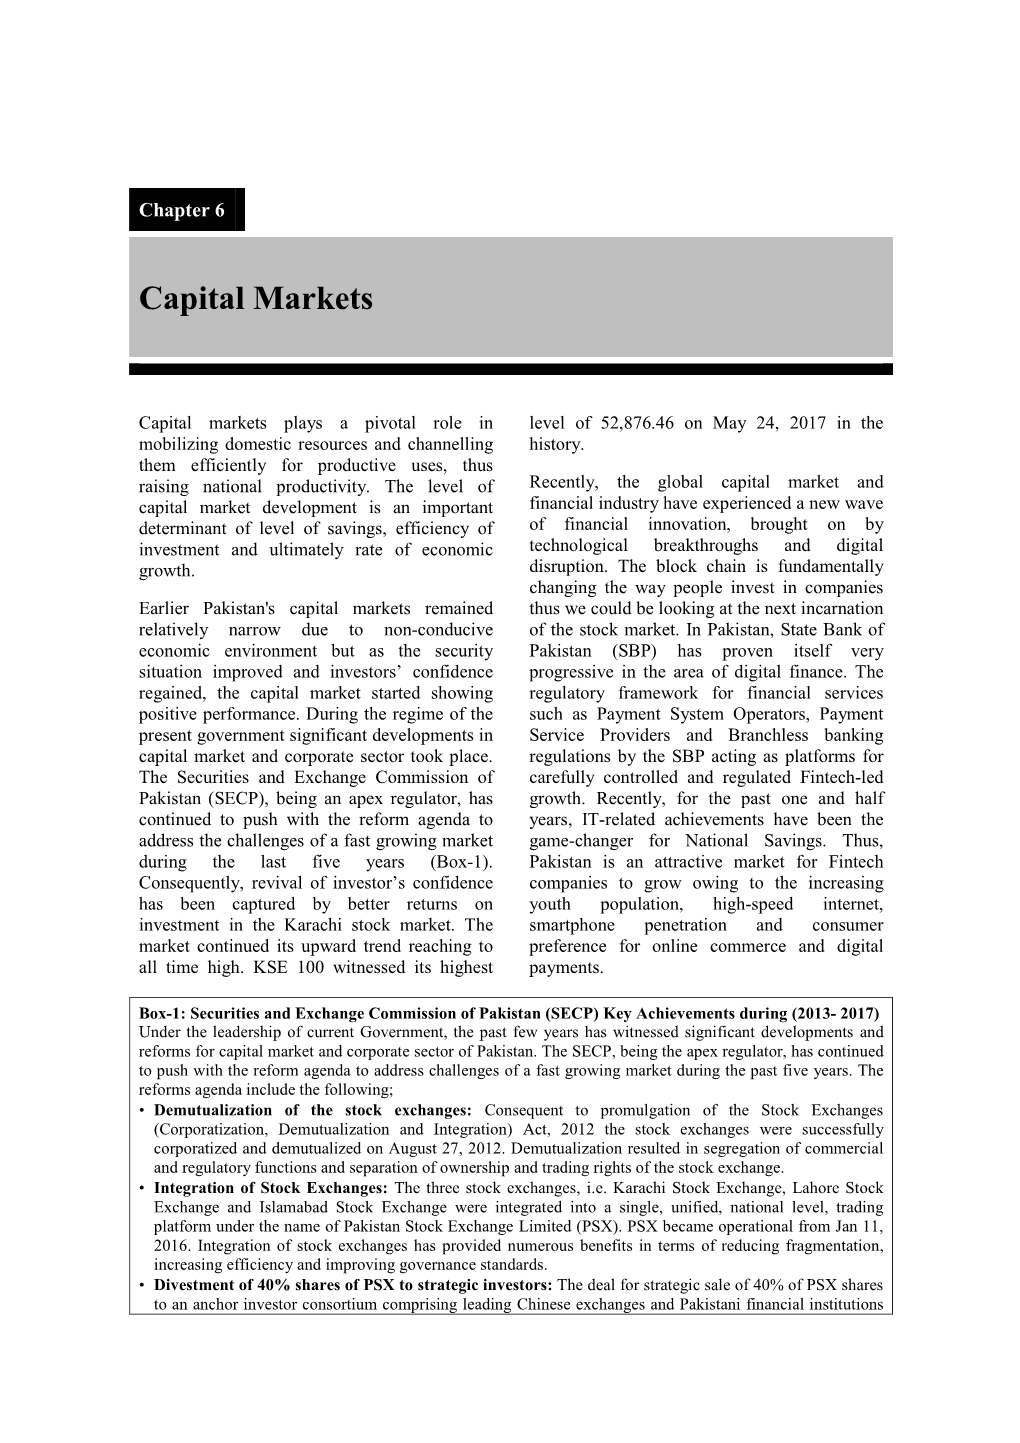 Capital Markets & Corporate Sector